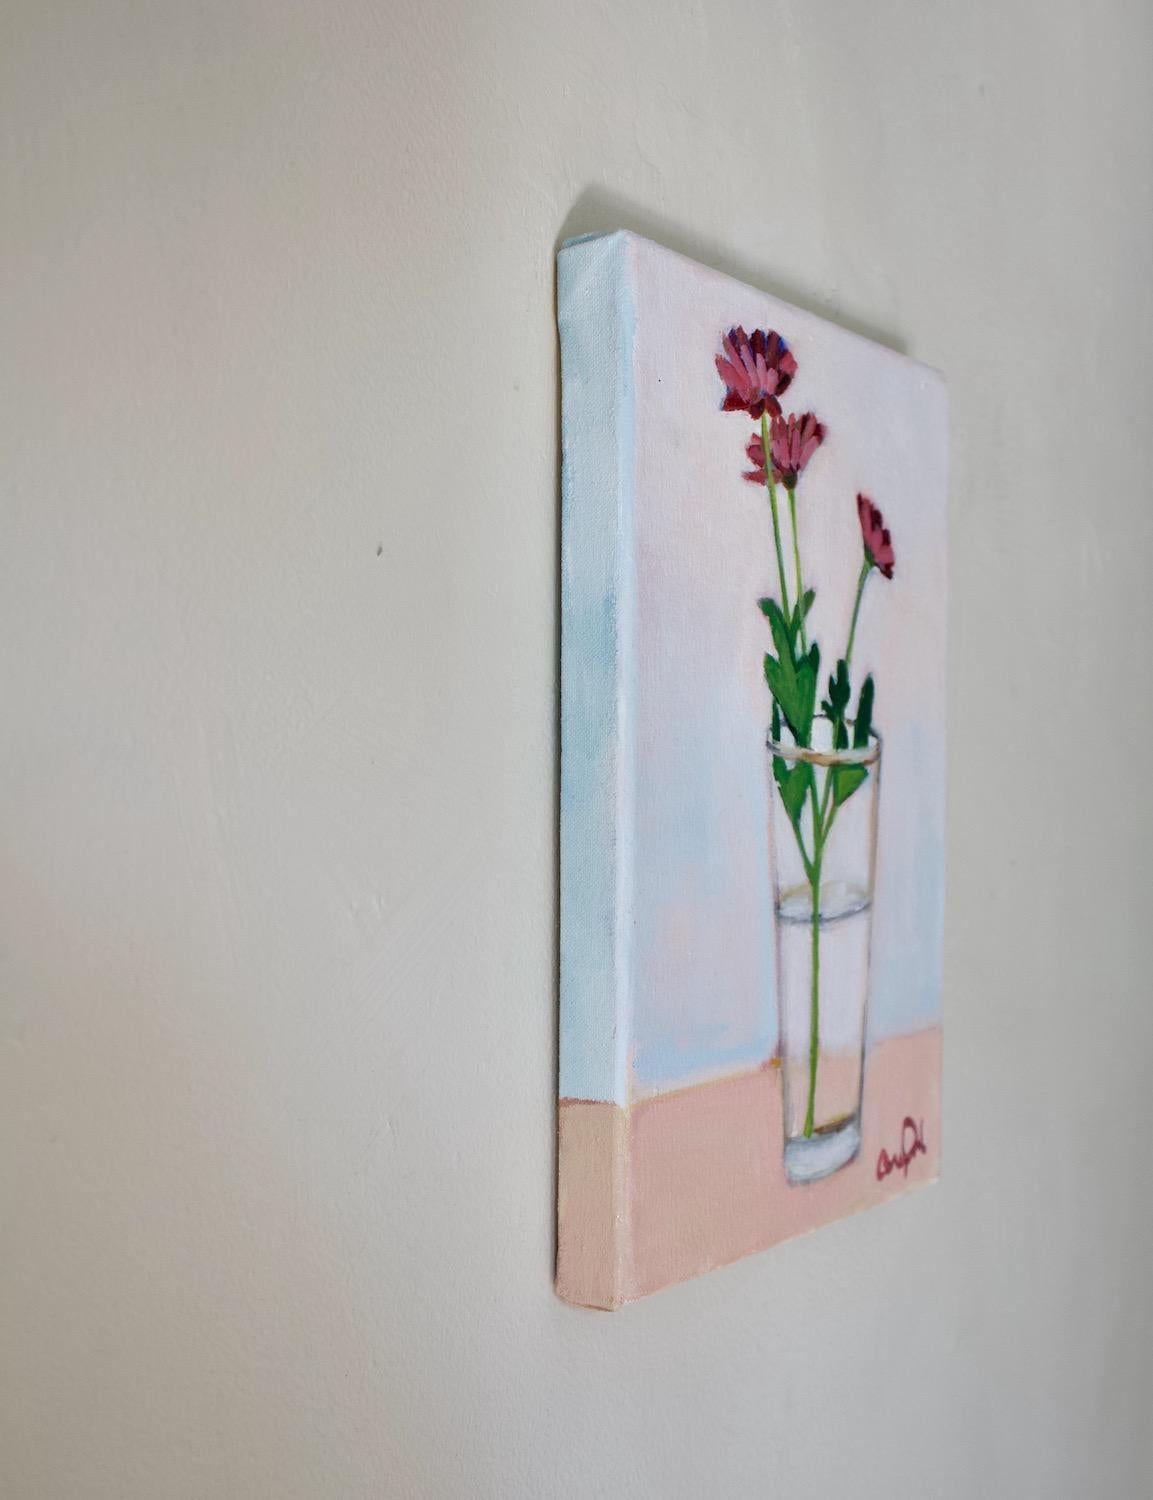 <p>Artist Comments<br>Artist Carey Parks displays a still life of red flowers arranged on a glass. Her impressionist style depicts the petals with a soft velvety feel. She paints pastel pink and blue tones in the background that help bring out the